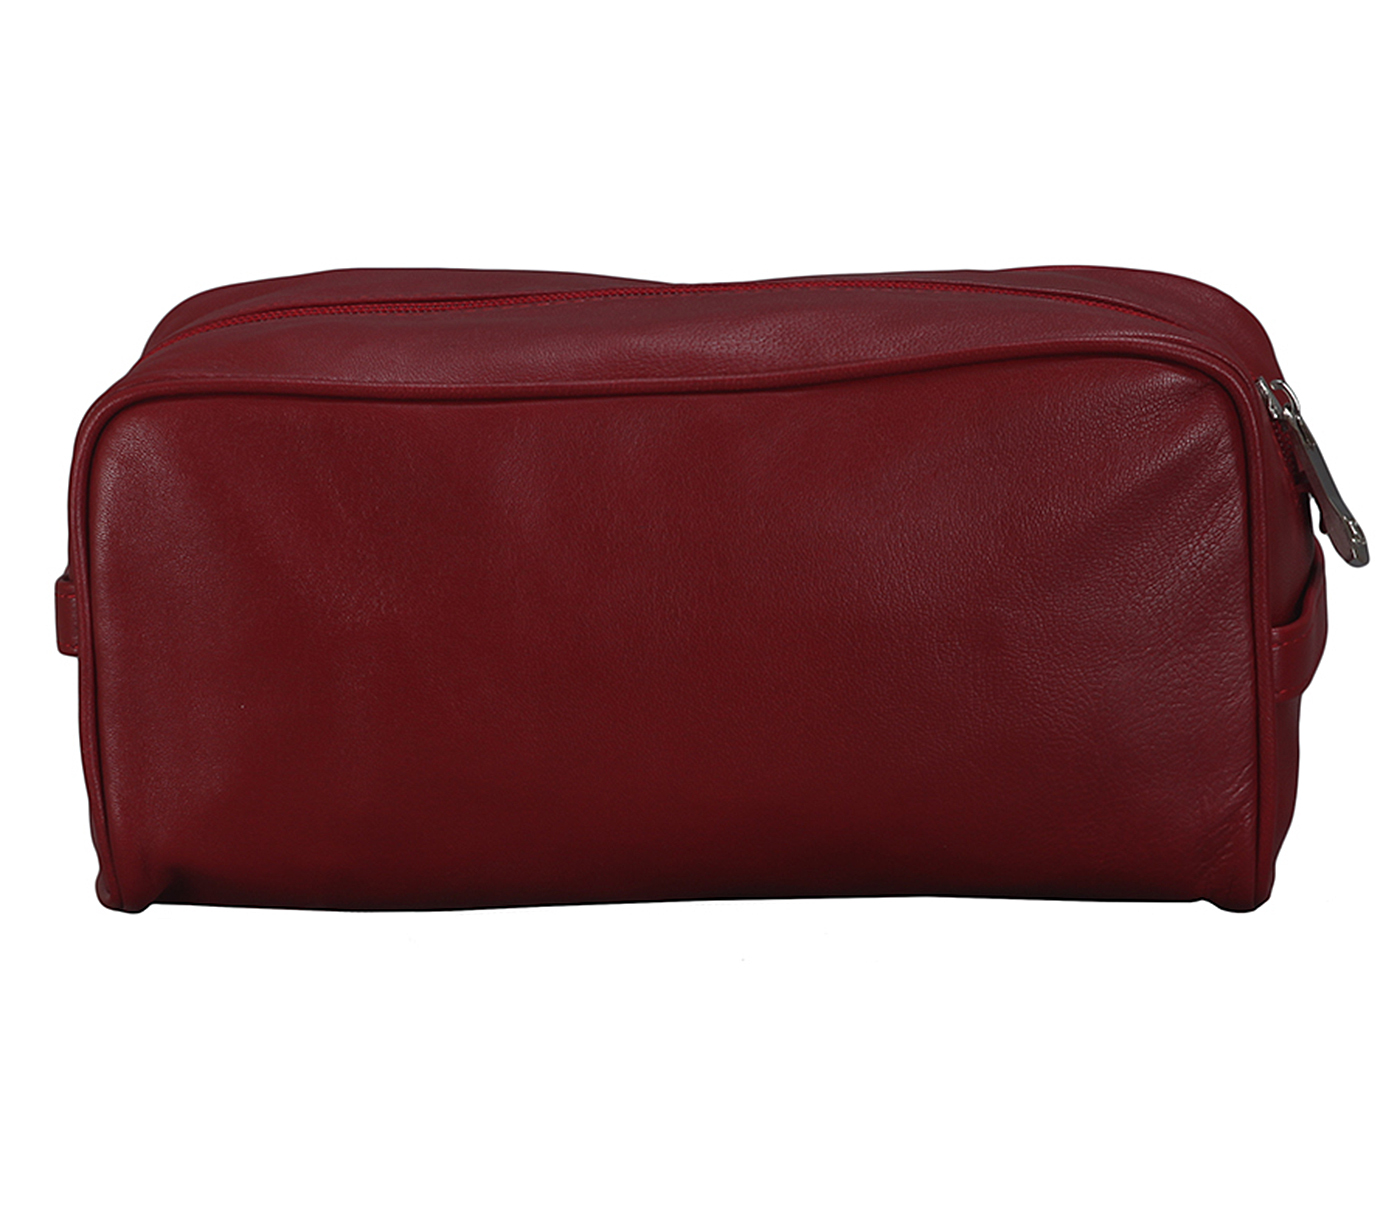 SC1--Unisex Wash And Toiletry Travel Pouch In Genuine Leather - Red